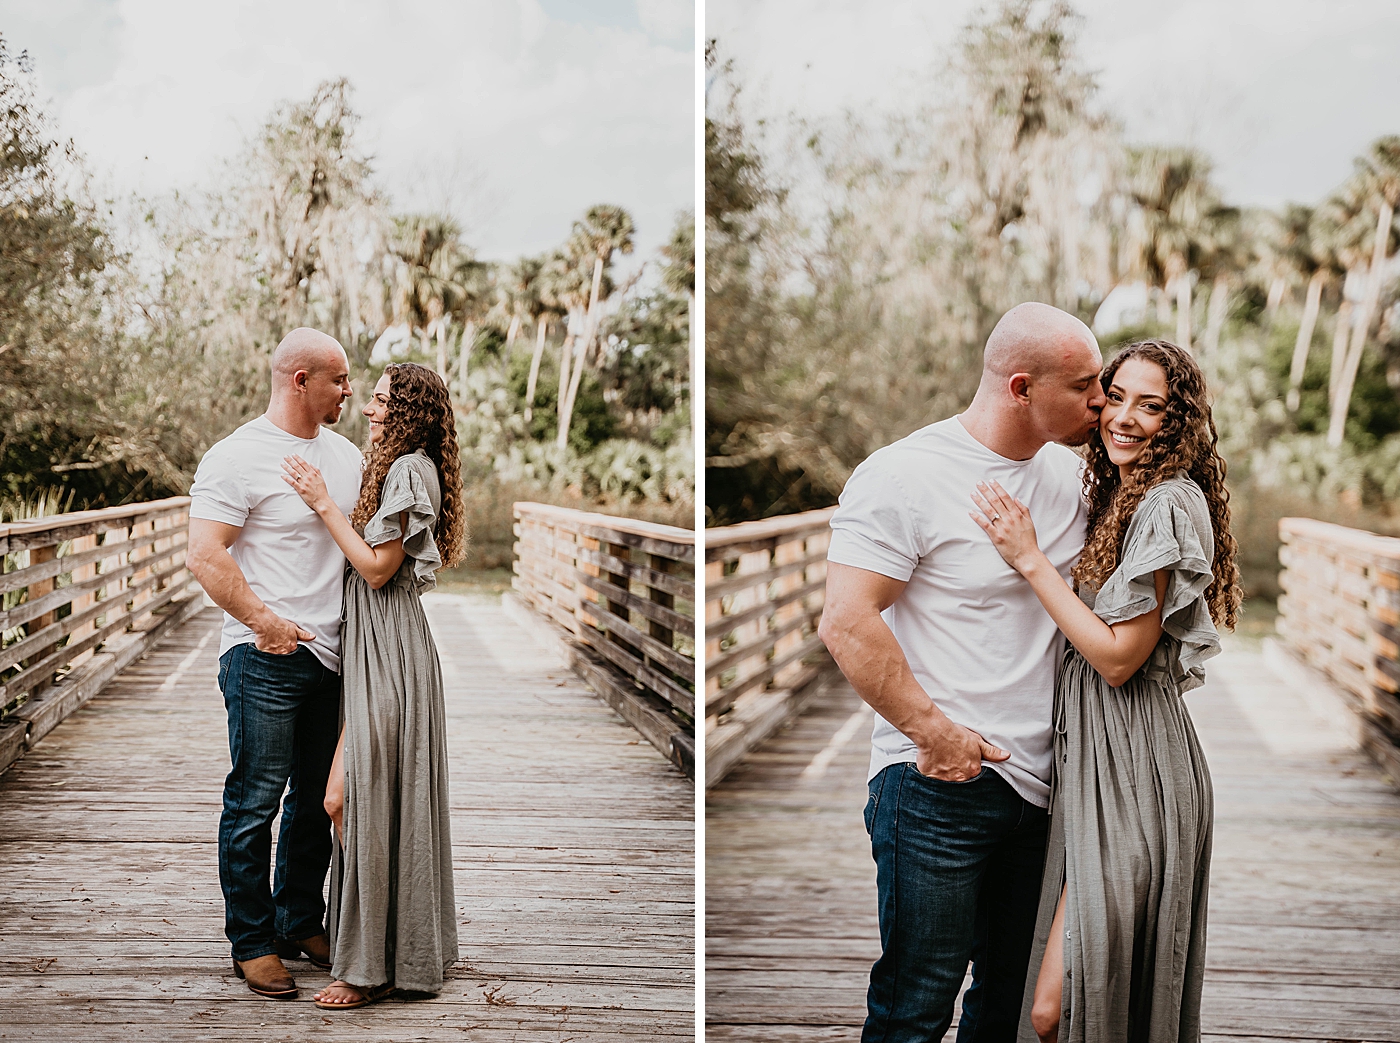 Couple holding each other and guy kissing girl on cheek on wood bridge Romantic Riverbend Park Engagement Photography captured by South Florida Photographer Krystal Capone Photography